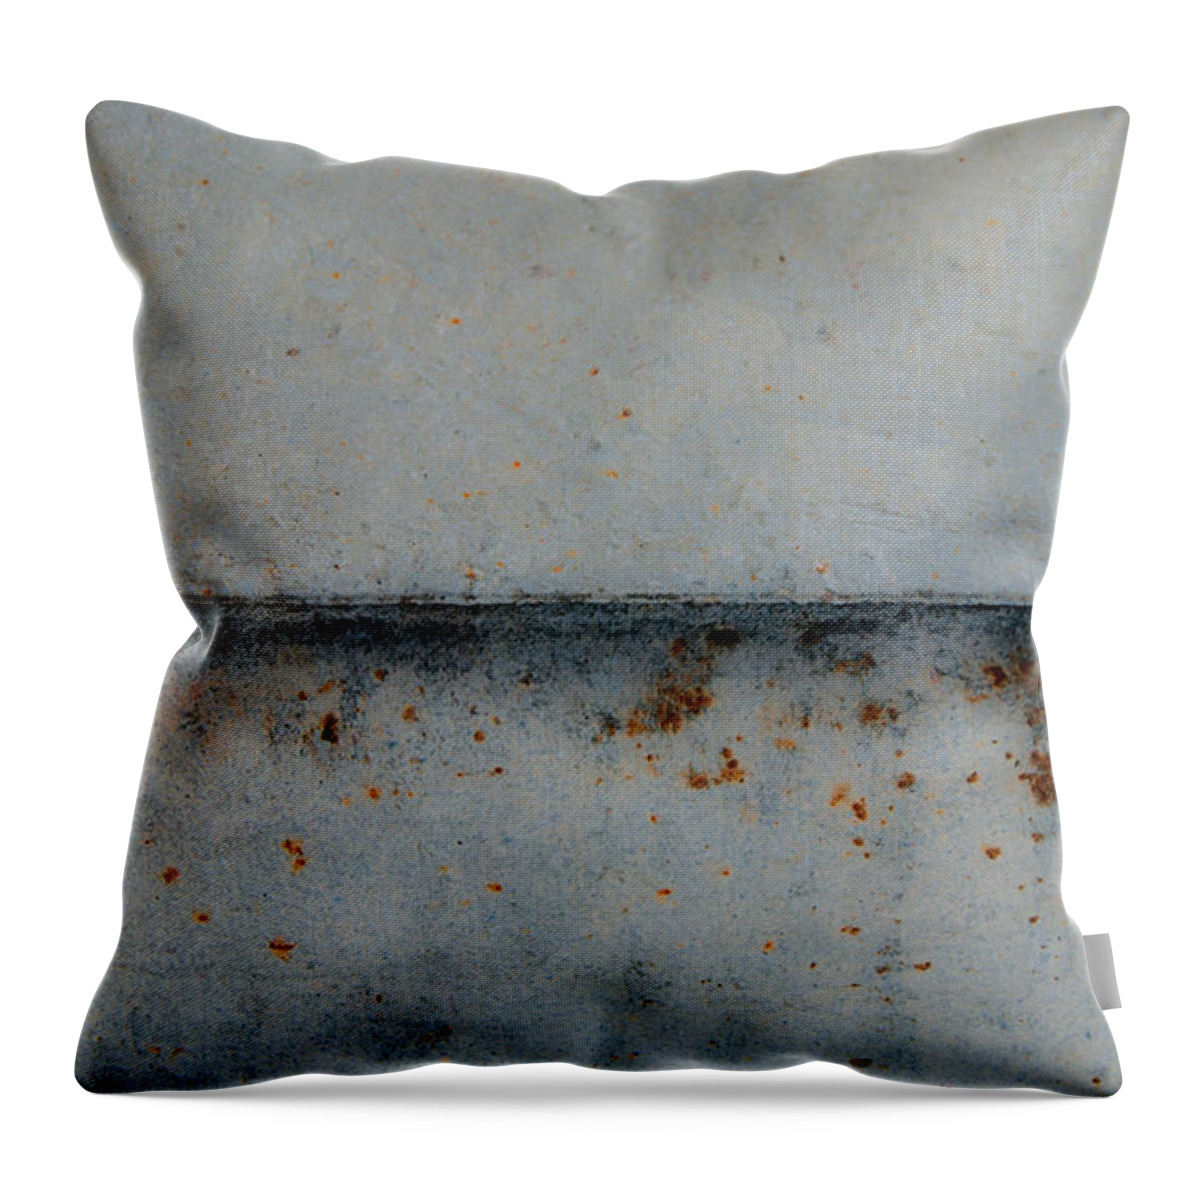 Fog Throw Pillow featuring the photograph Distant Horizon by Jani Freimann